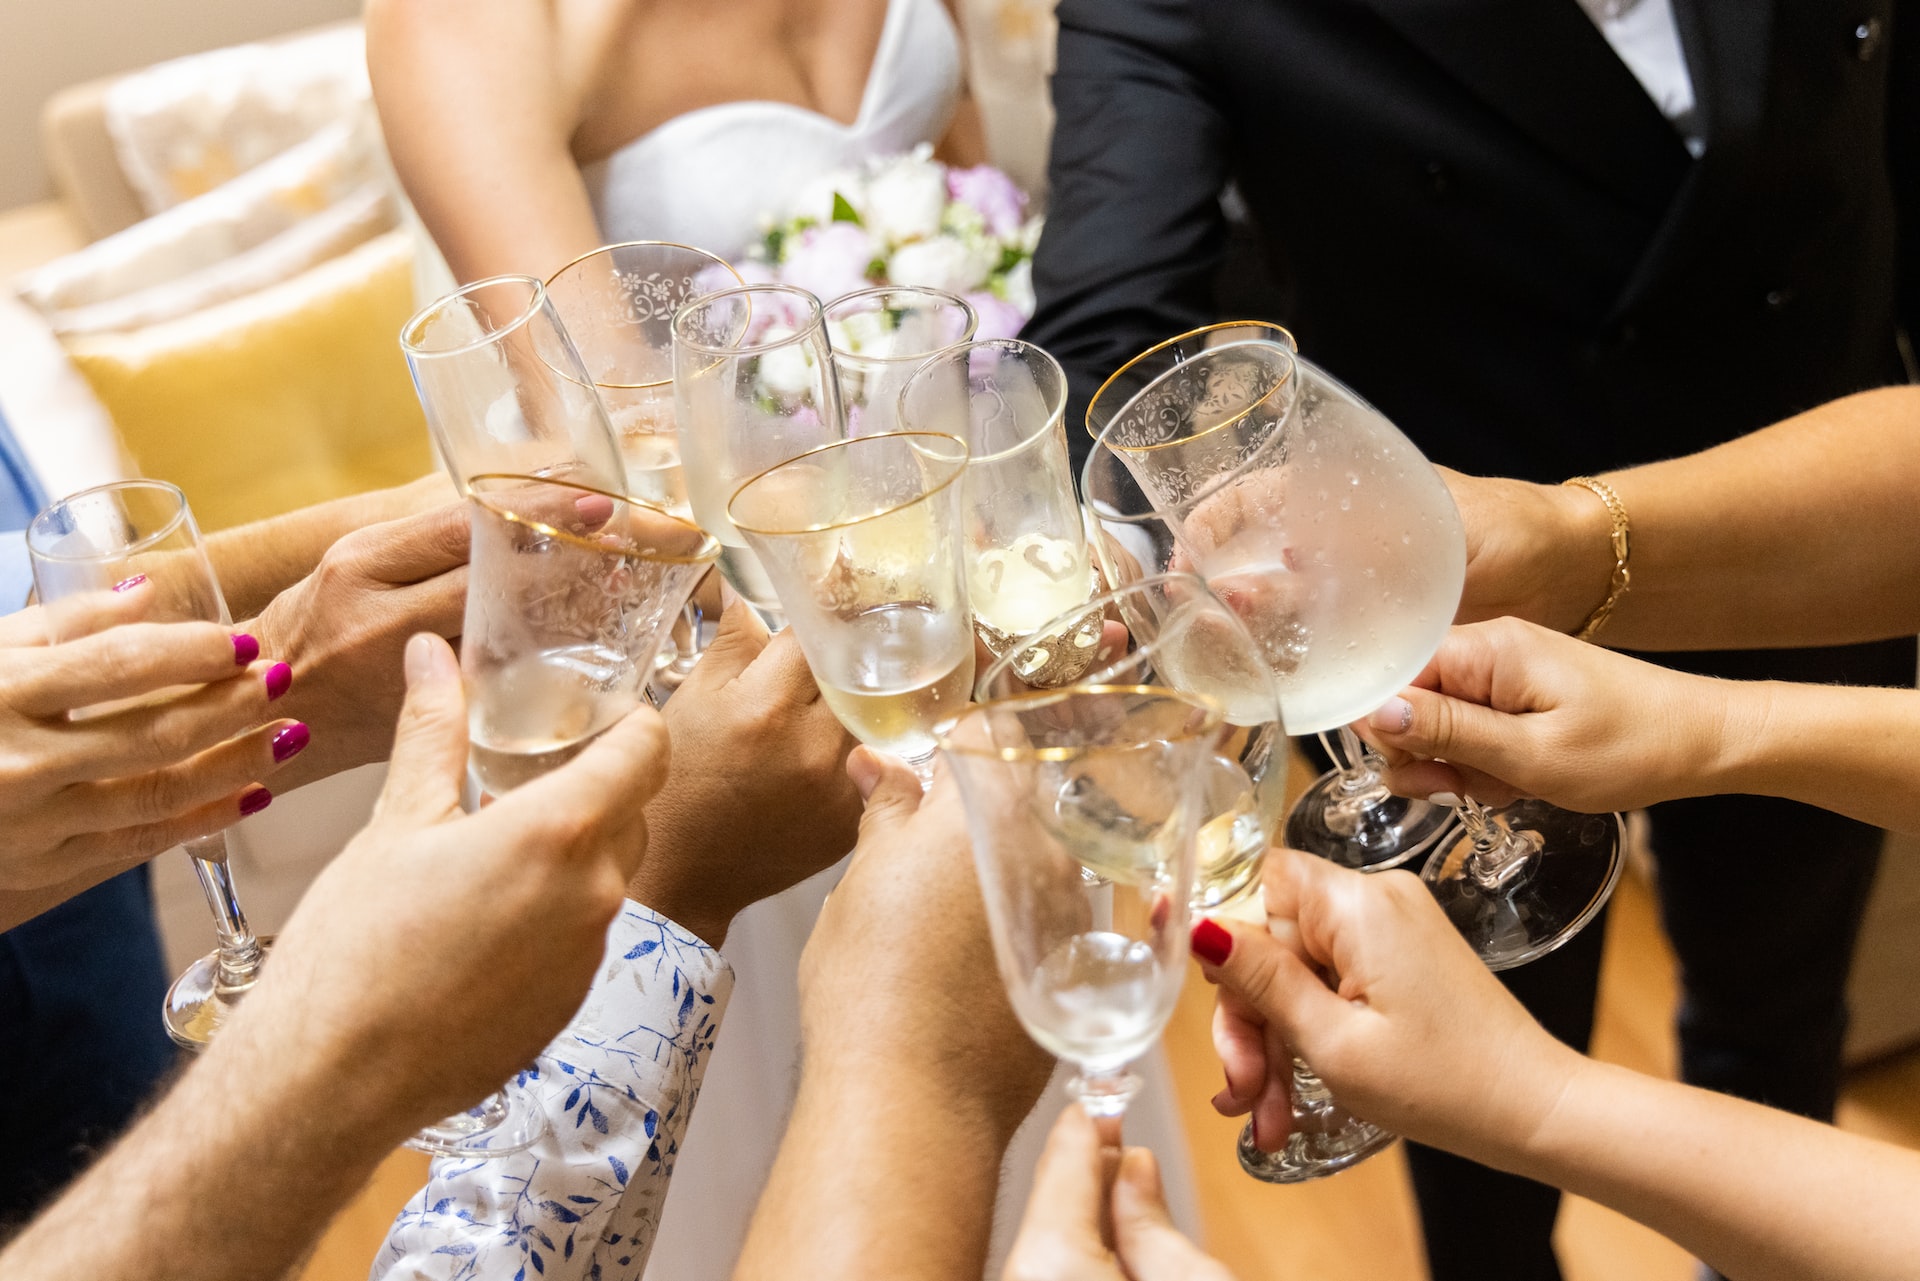 https://holaweddings.com/wp-content/uploads/2021/11/Wedding-couple-toasting-with-wedding-guests.jpg